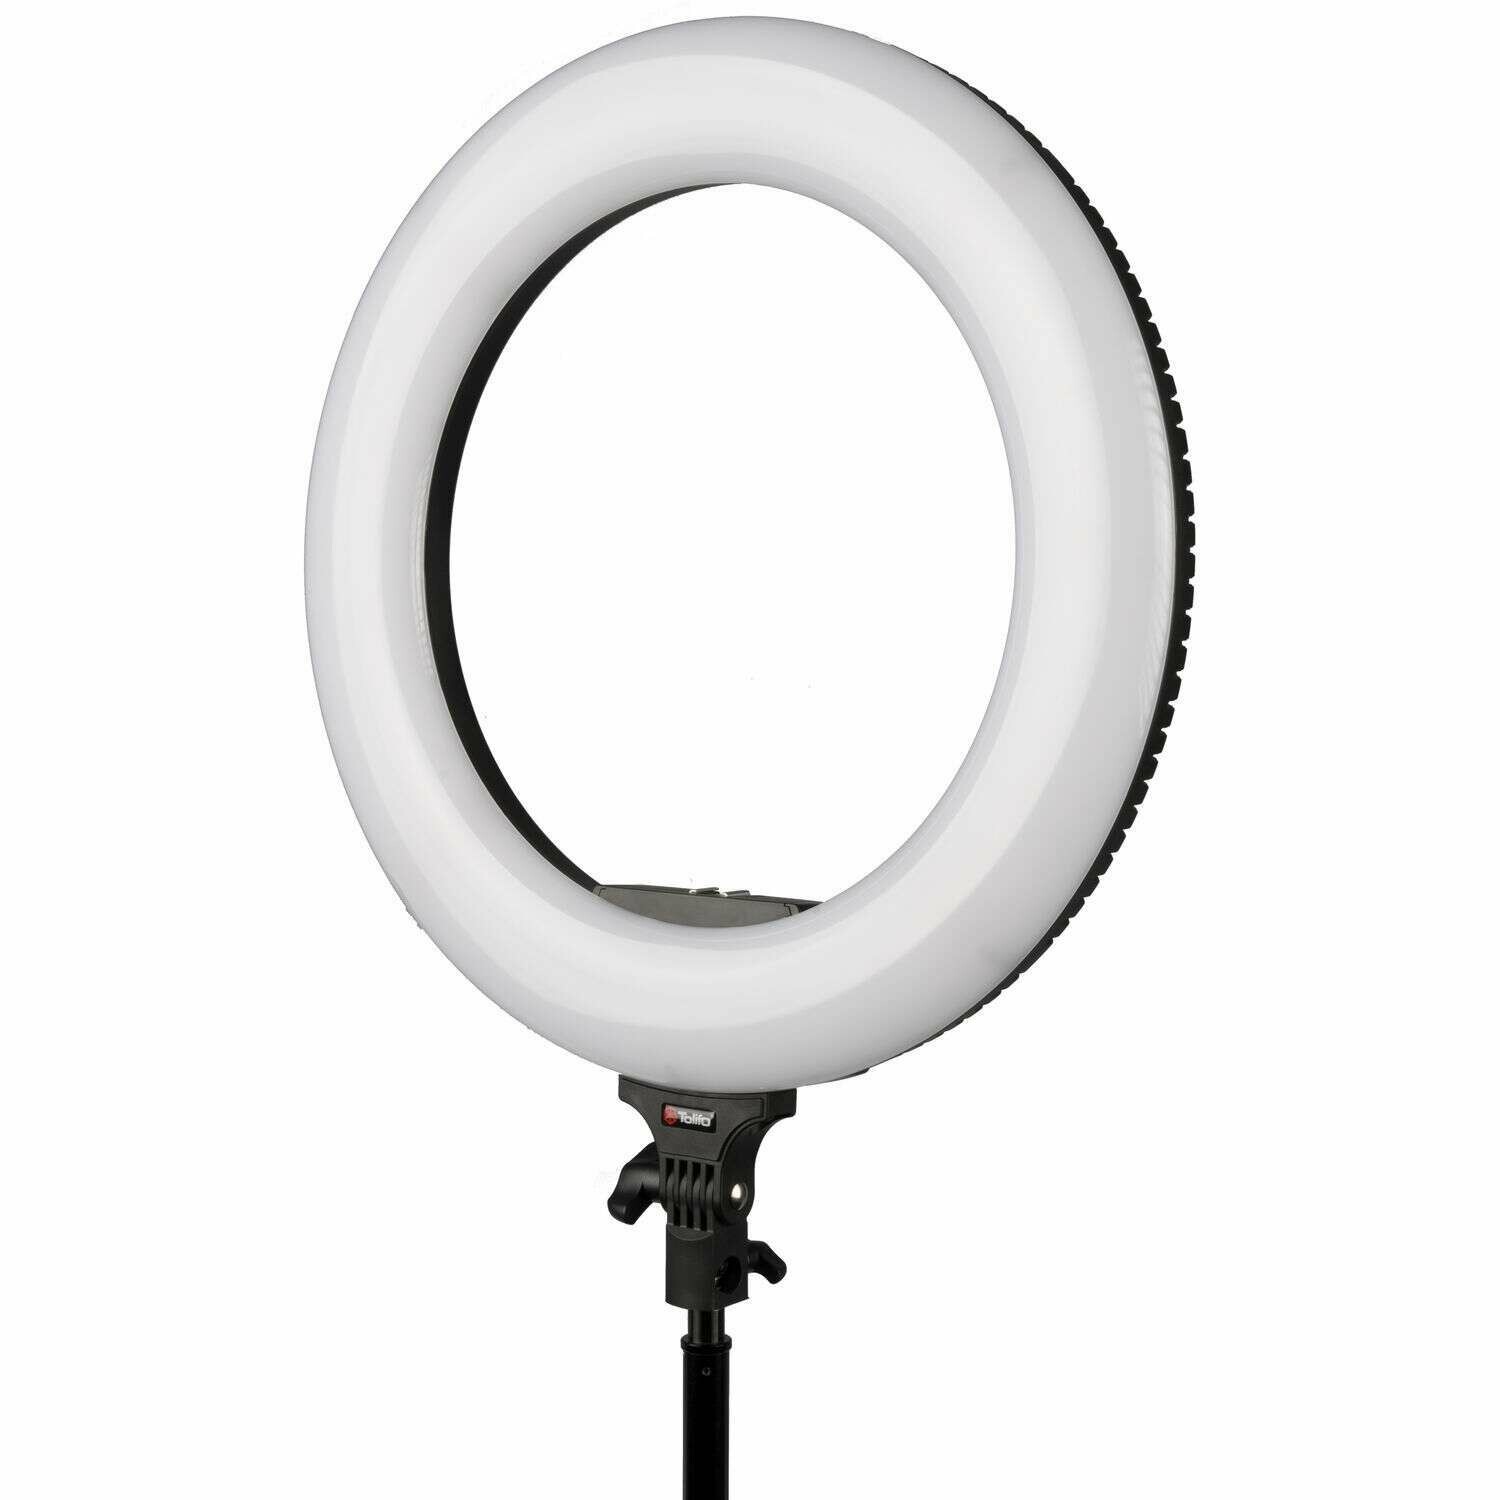 Tolifo R60B 60W Bi-color LED Ring Light With Accessories